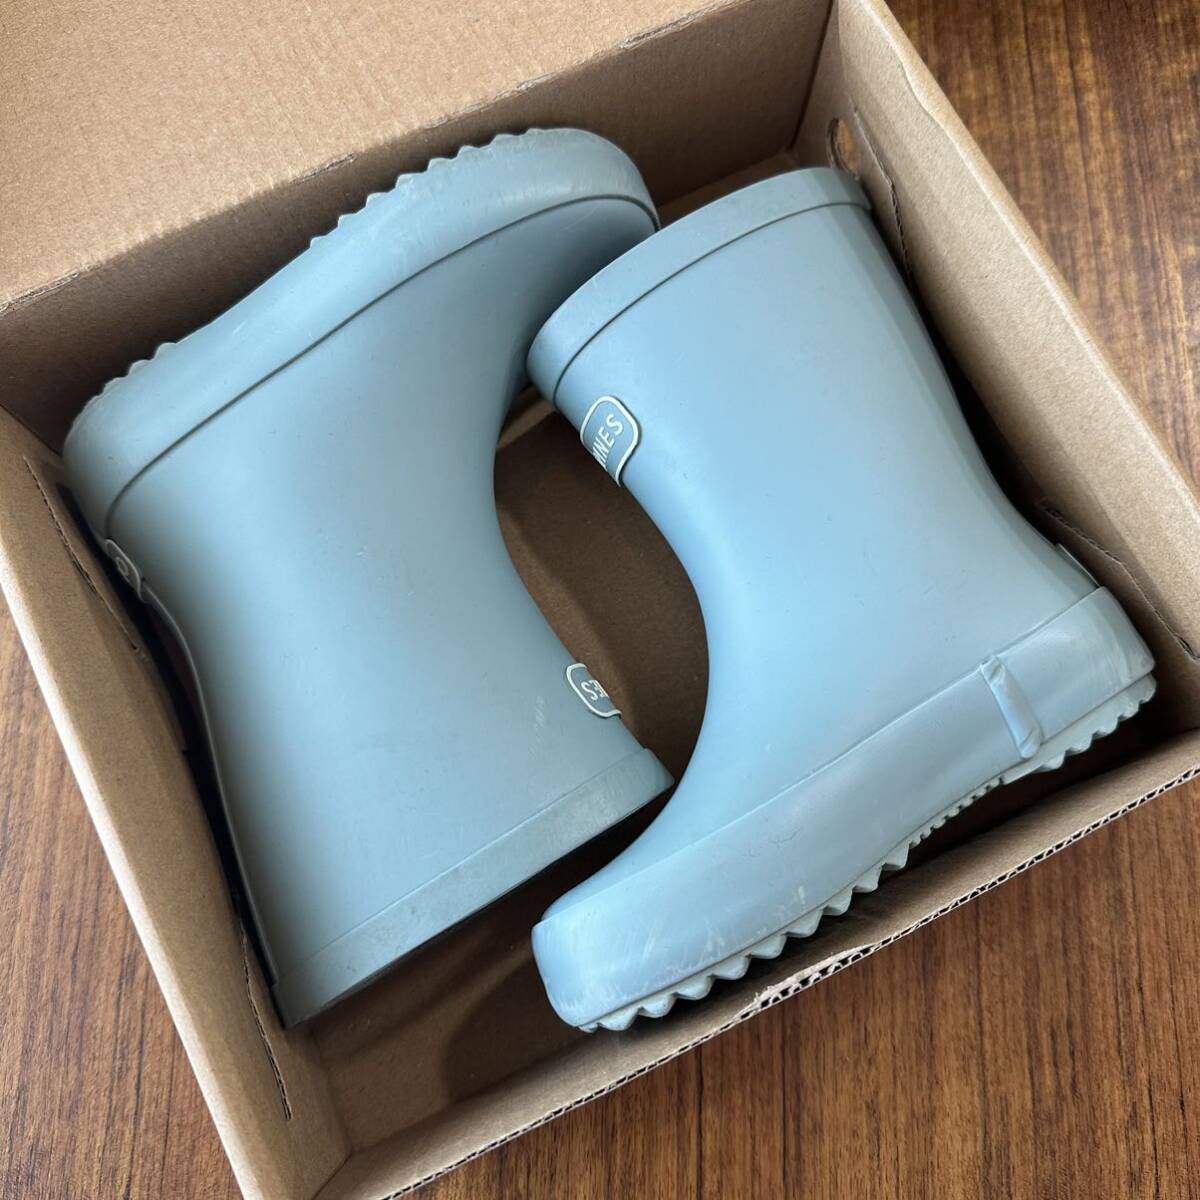  rain boots baby Kids size boots OMNES 15cm moss green free shipping EAZY. send 